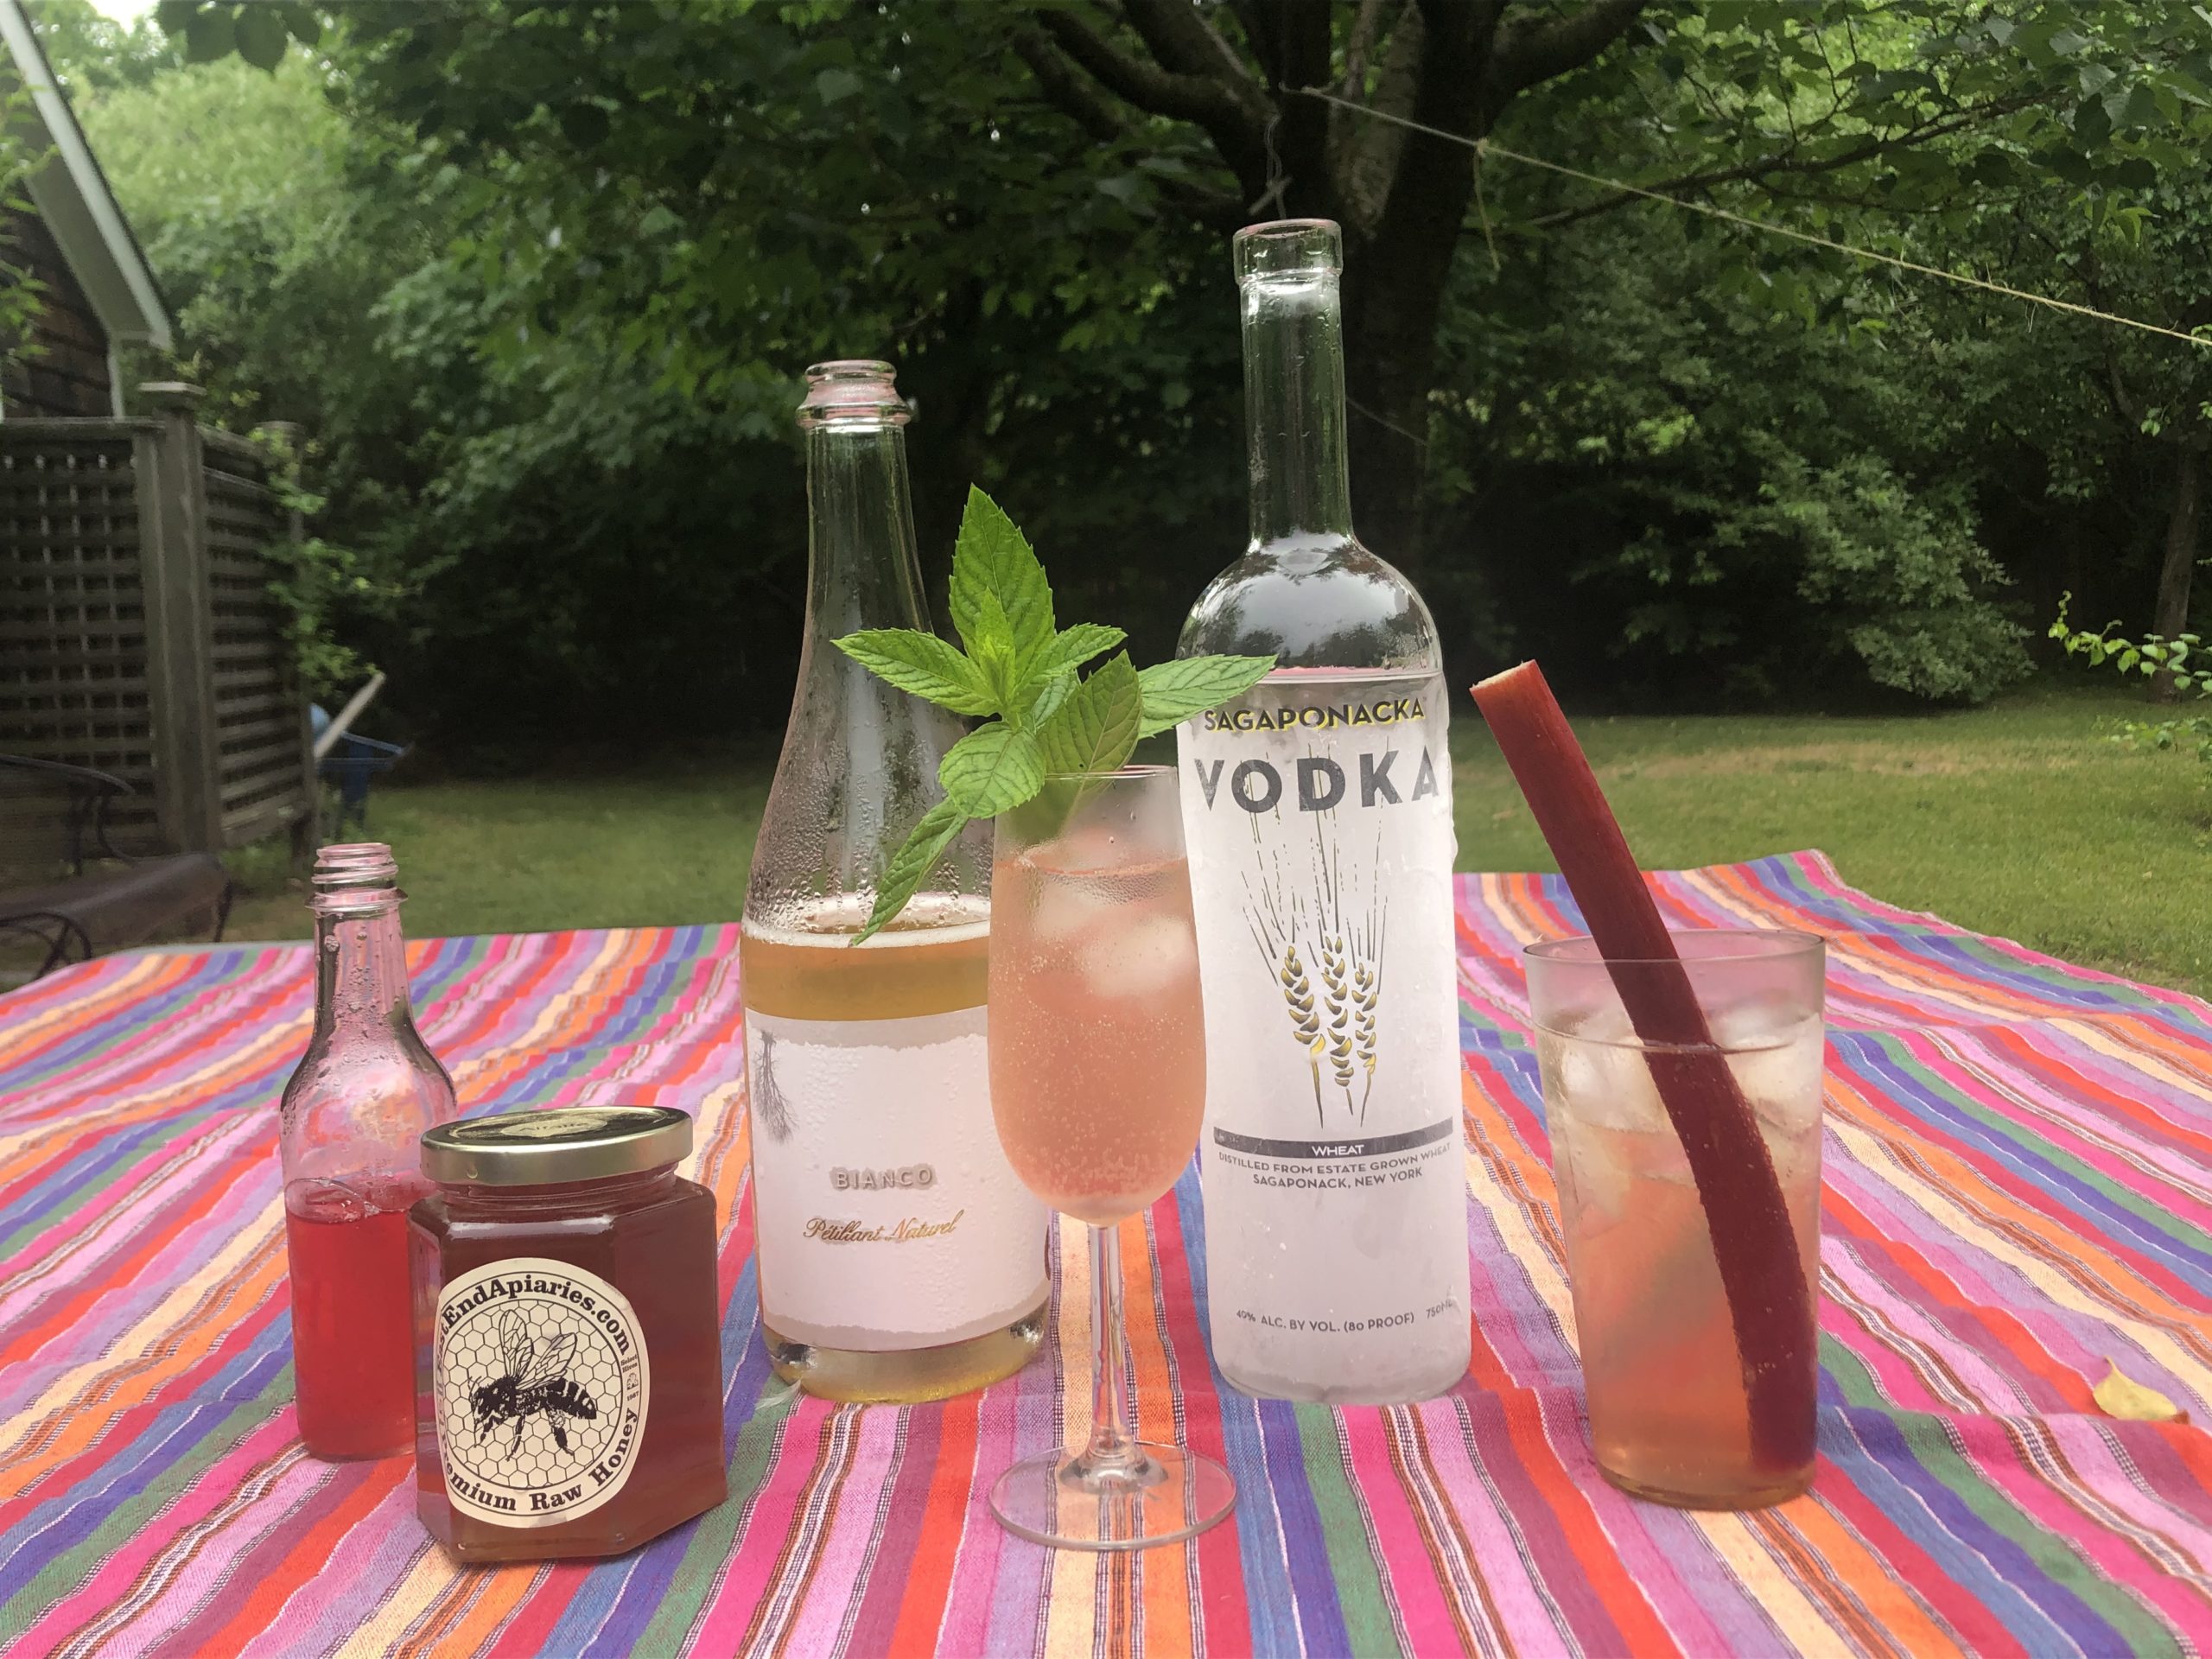 Create your own rhubarb cocktail with all local ingredients: Sag Harbor honey, rhubarb, wheat vodka and rhubarb liquor from the Sagaponack Farm Distillery.